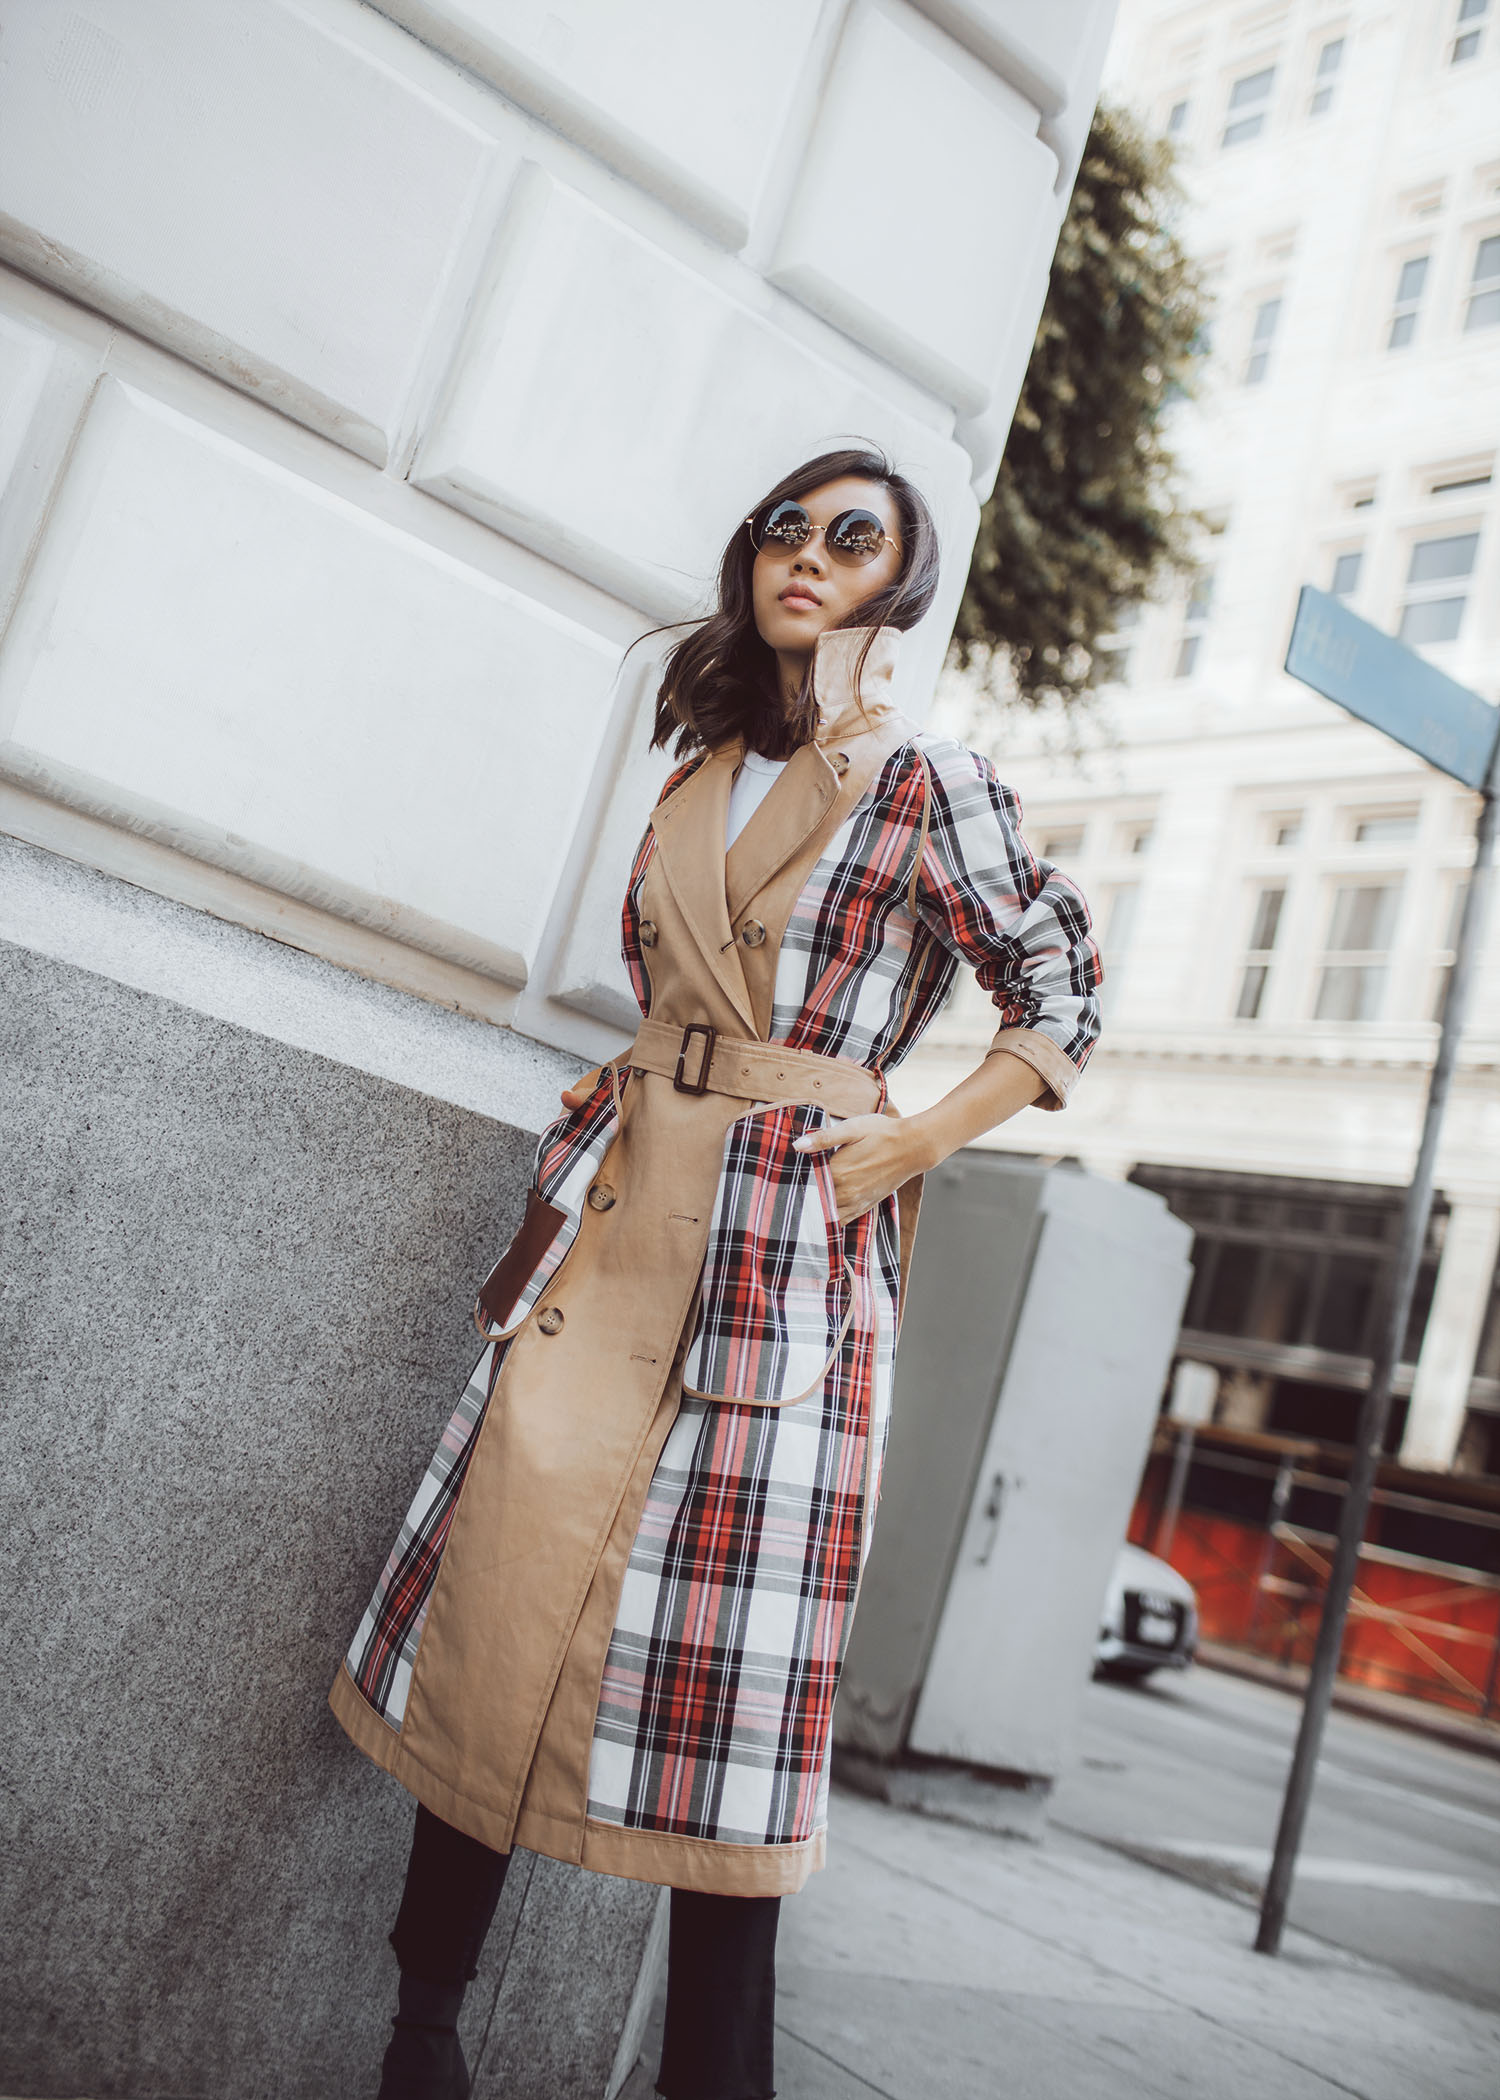 Jenny Tsang of Tsangtastic wearing uniqlo jw anderson trench coat and victoria beckham rounded sunglasses